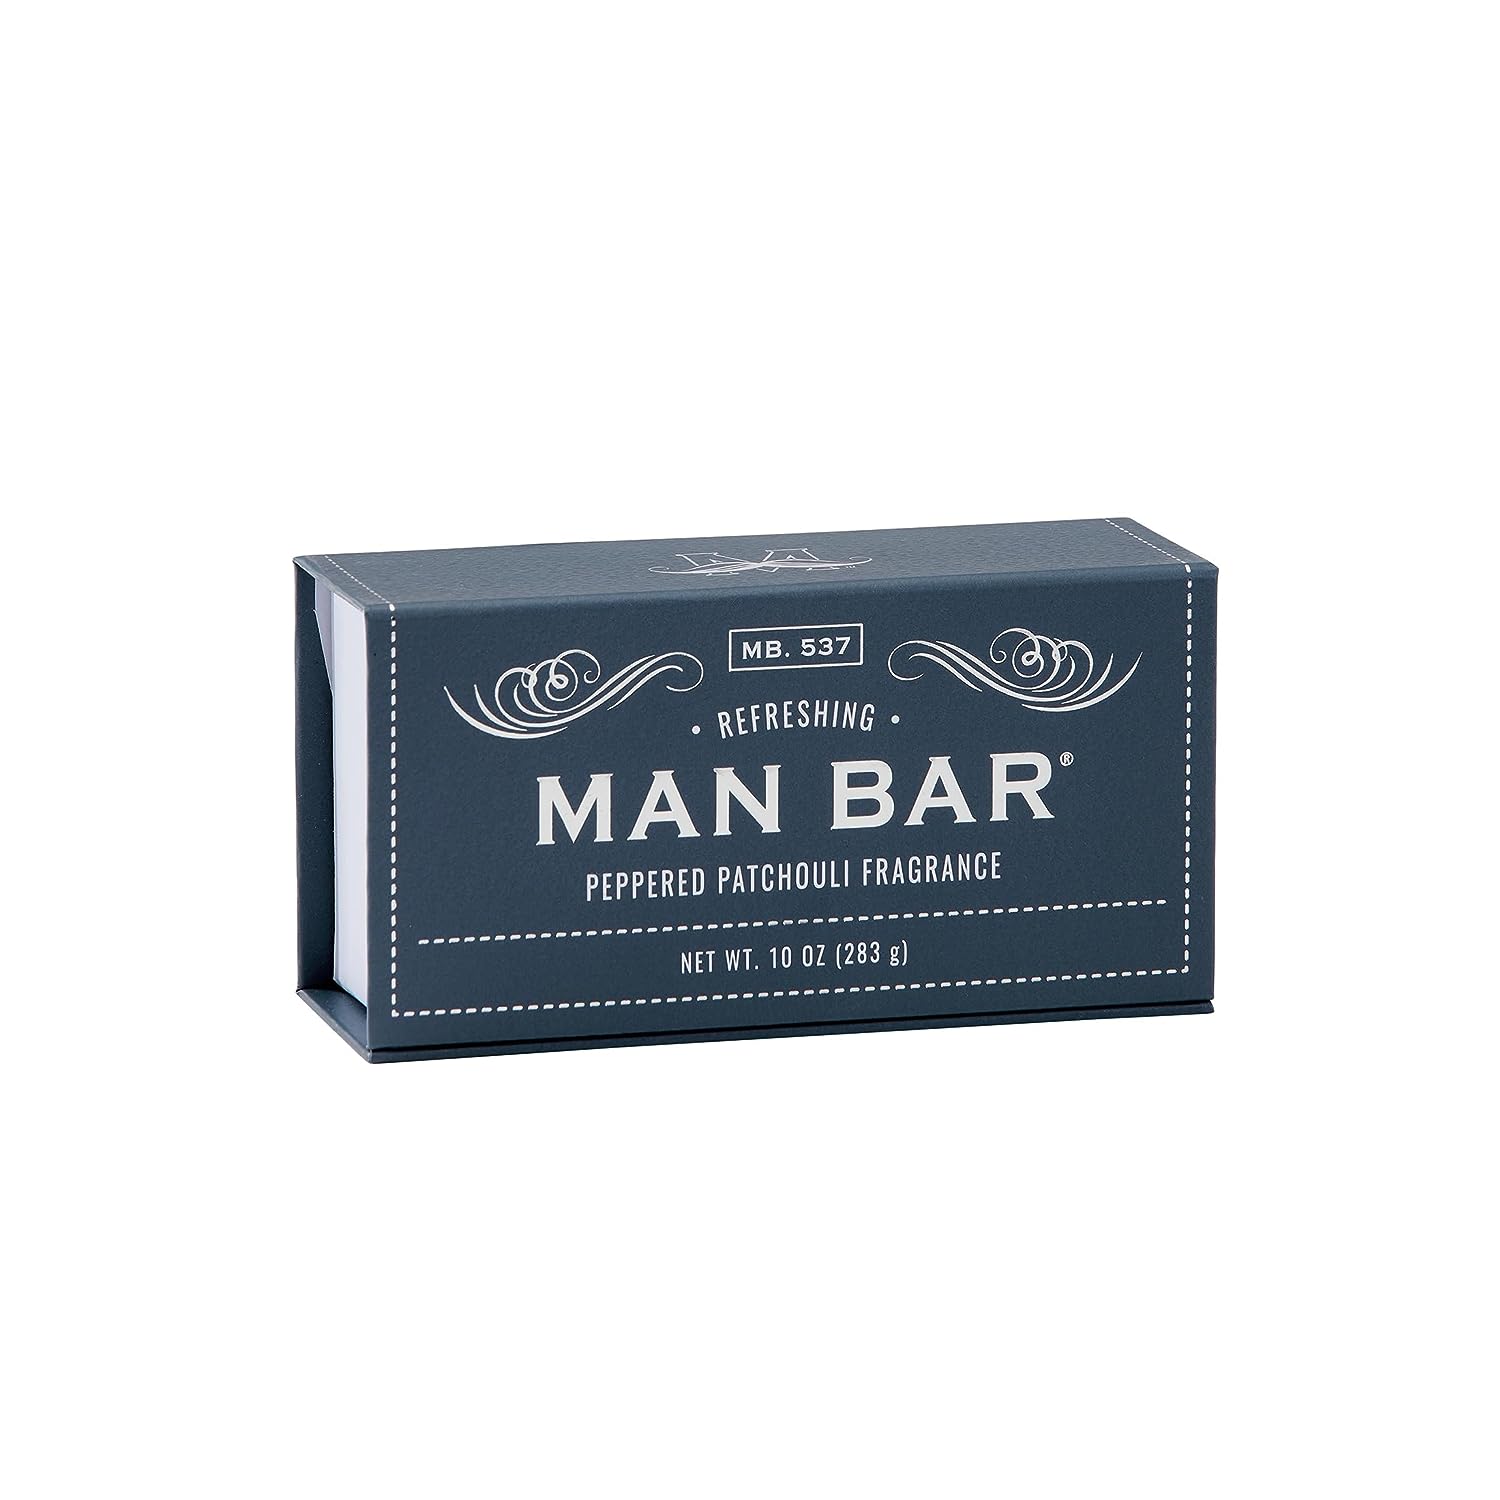 San Francisco Soap Company Peppered Patchouli Fragrance Man Bar - Refreshing - No Harmful Chemicals - Good for All Skin Types - Made in the USA